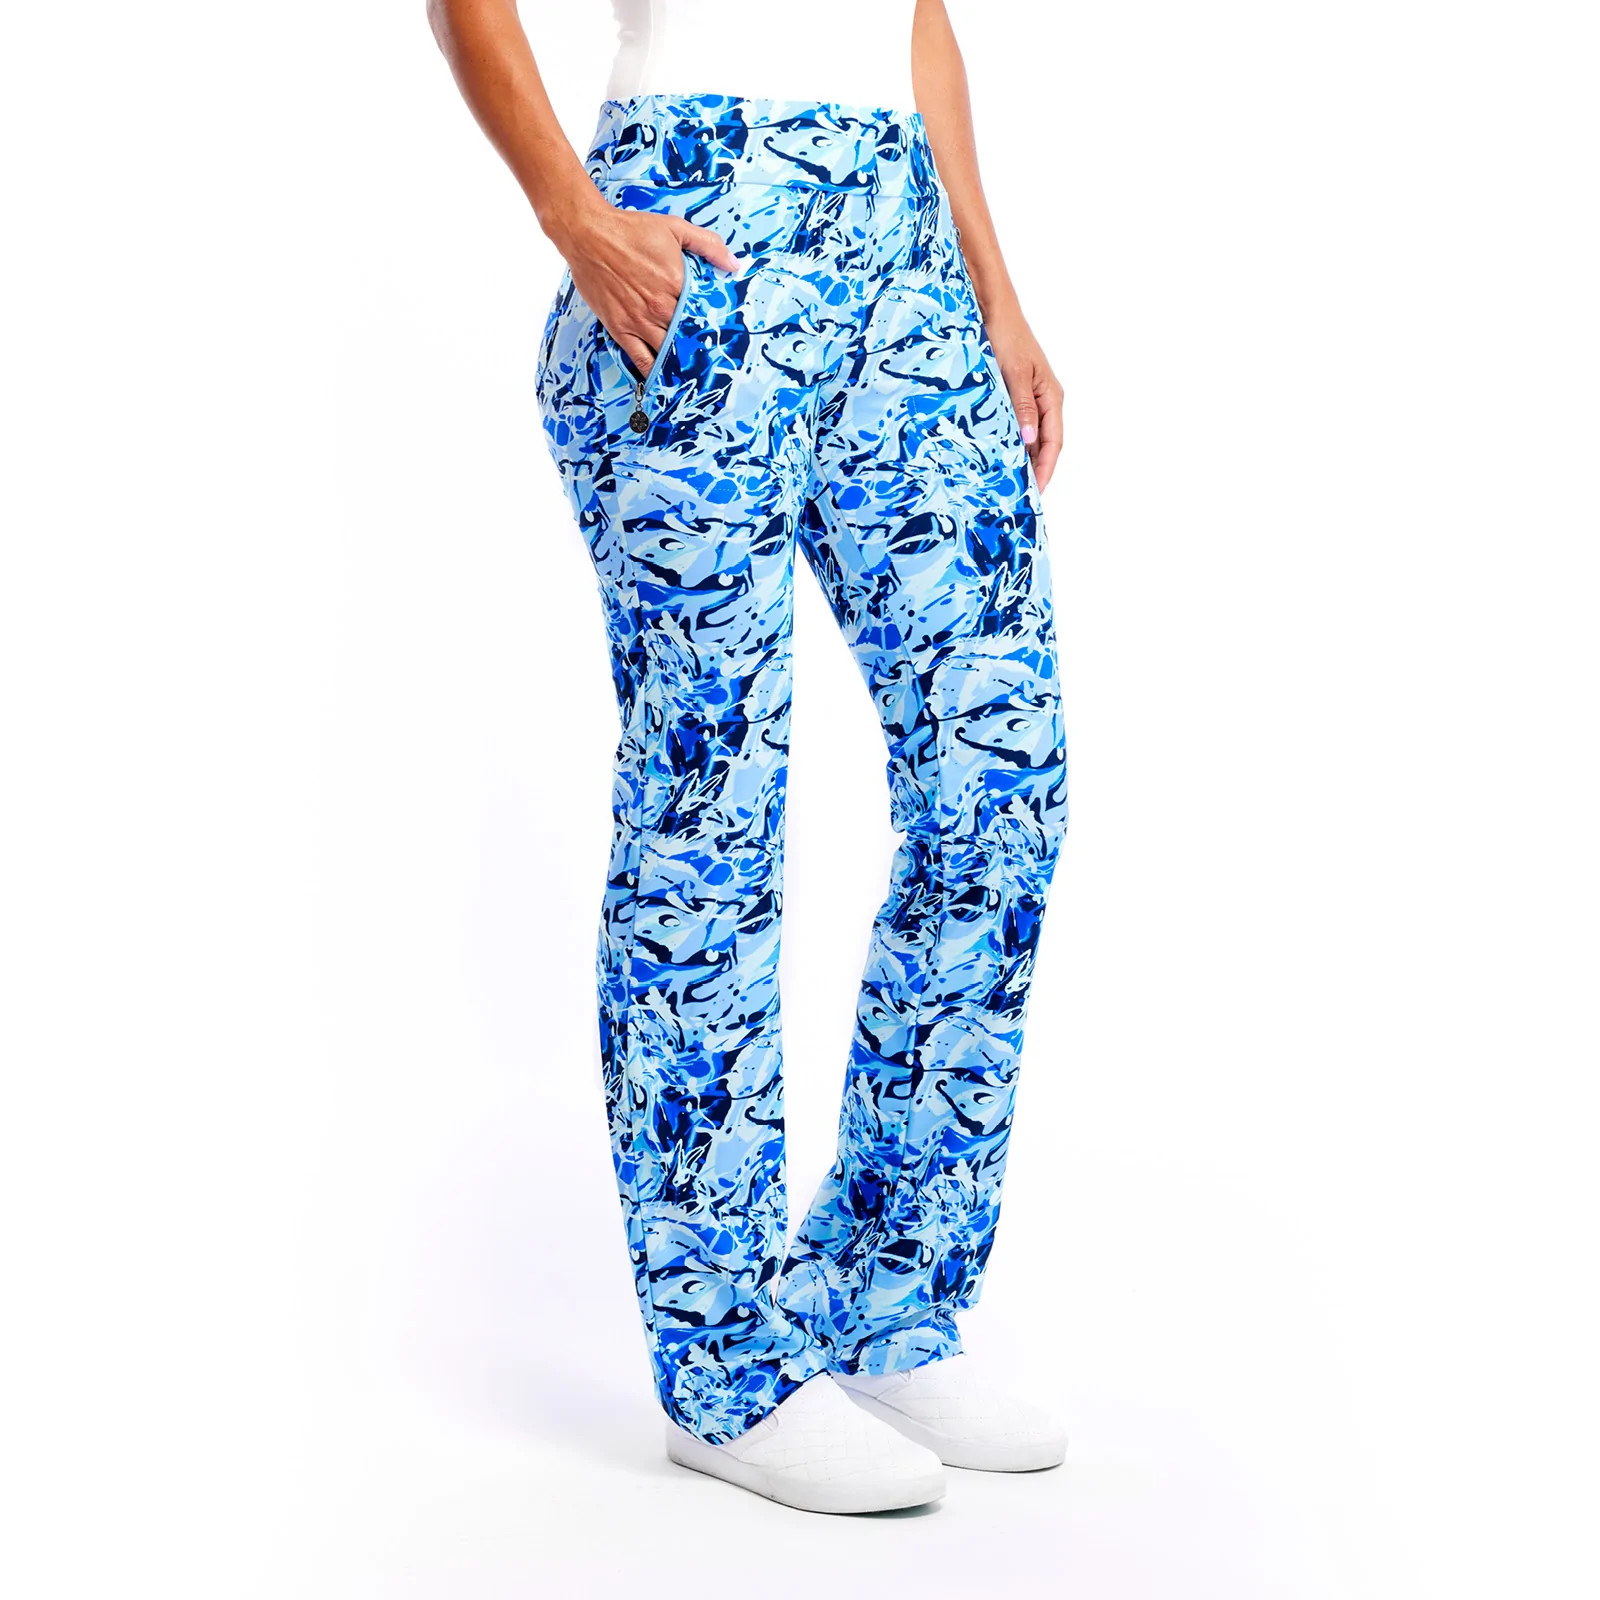 TZU TZU Sport Lexi Women's Golf Pant - Omni - Fore Ladies - Golf Dresses  and Clothes, Tennis Skirts and Outfits, and Fashionable Activewear